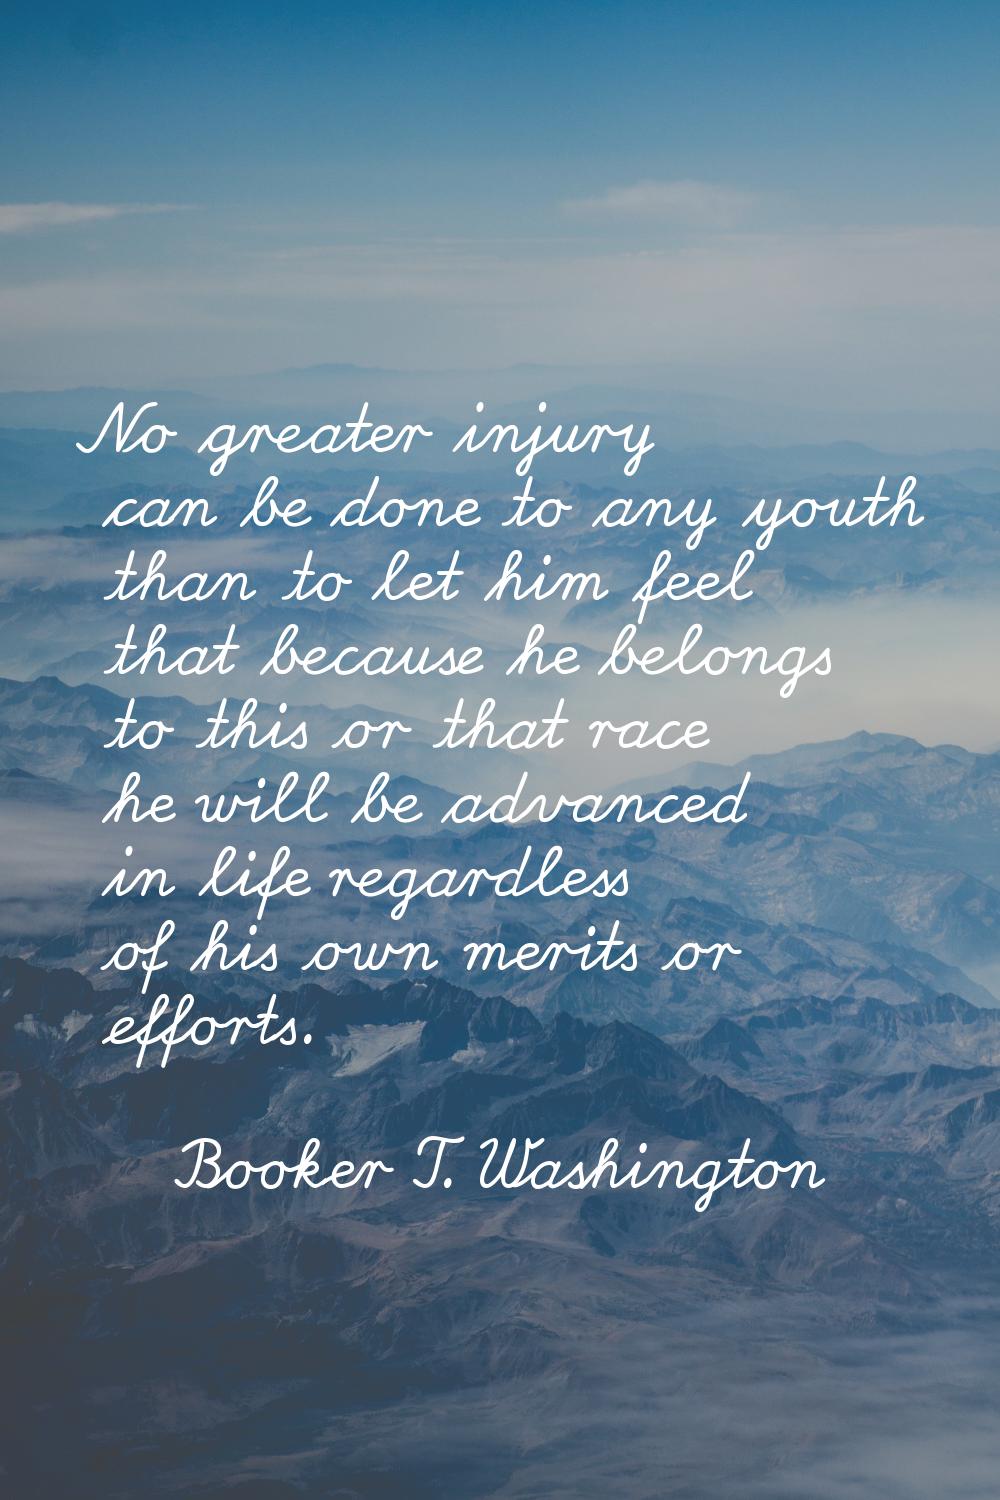 No greater injury can be done to any youth than to let him feel that because he belongs to this or 